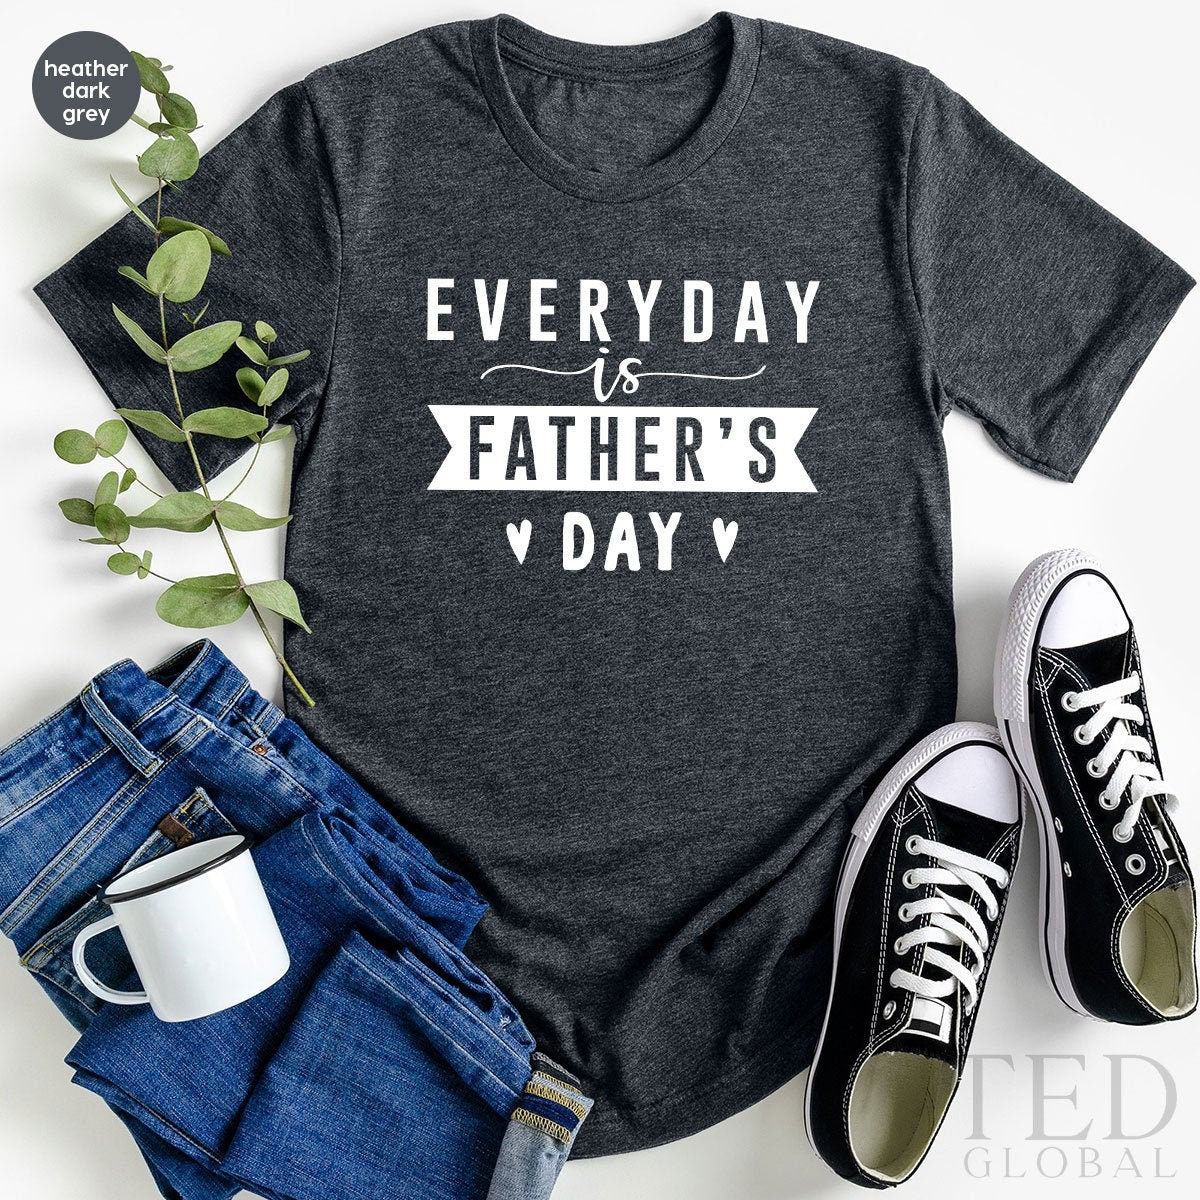 Fathers Day Shirt, Best Dad Shirt, Step Dad Gift, Gifts For Dad, Daddy T Shirt, New Dad Gift, Gift For Husband, Dad From Daughter - Fastdeliverytees.com